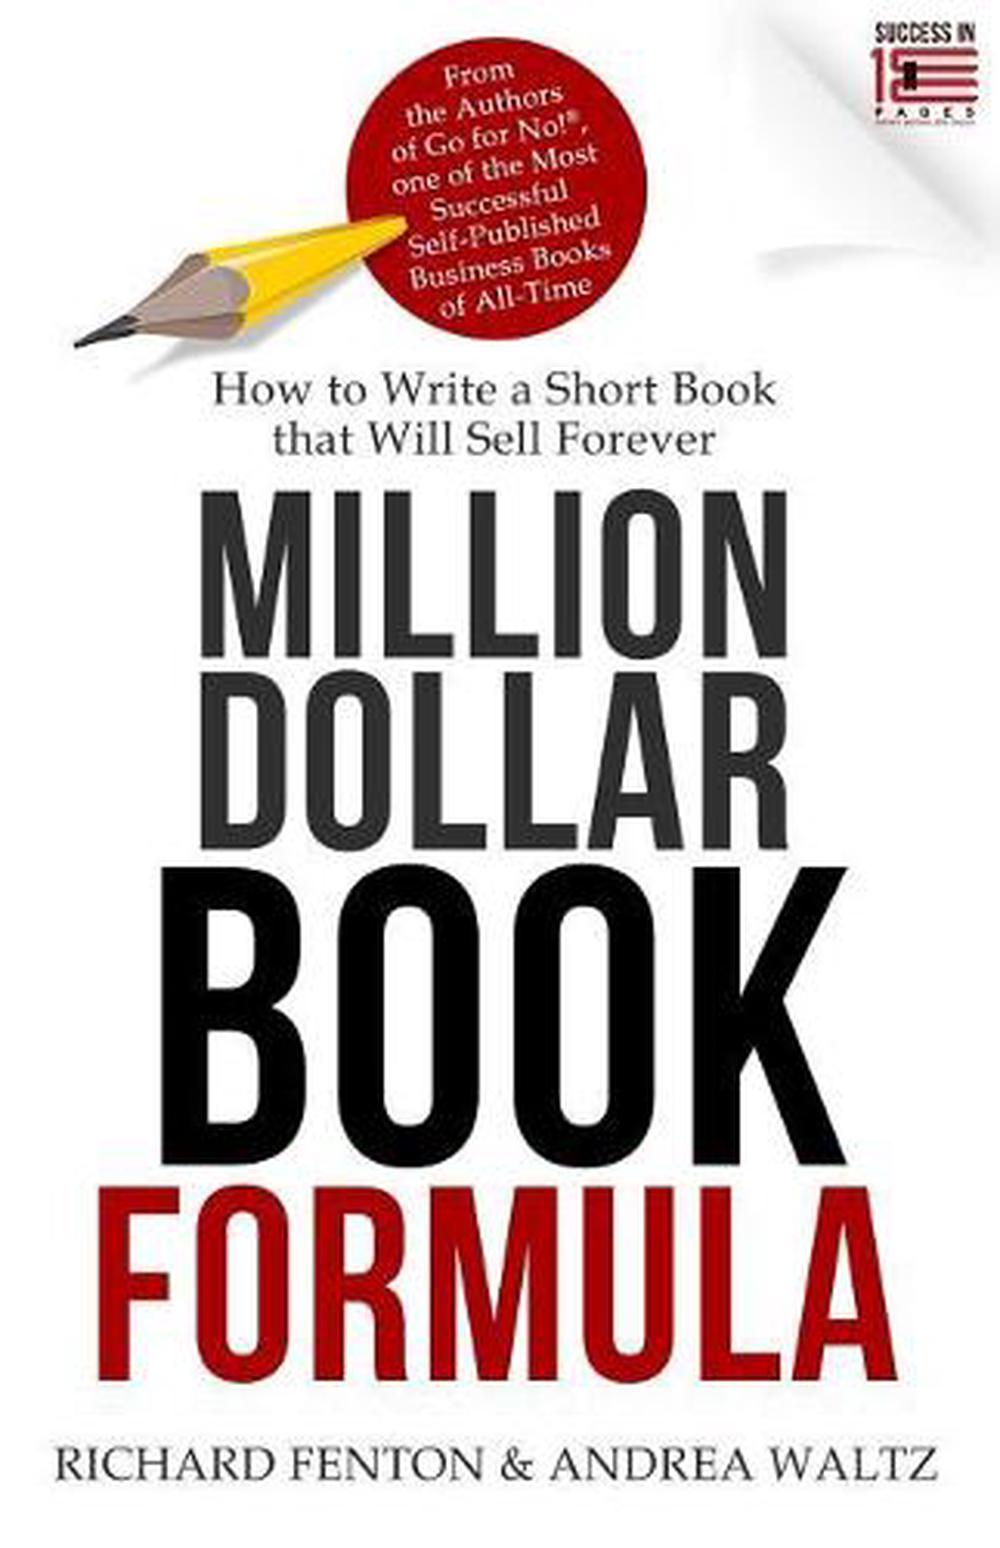 Million Dollar Book Formula: How to Write a Short Book That Will